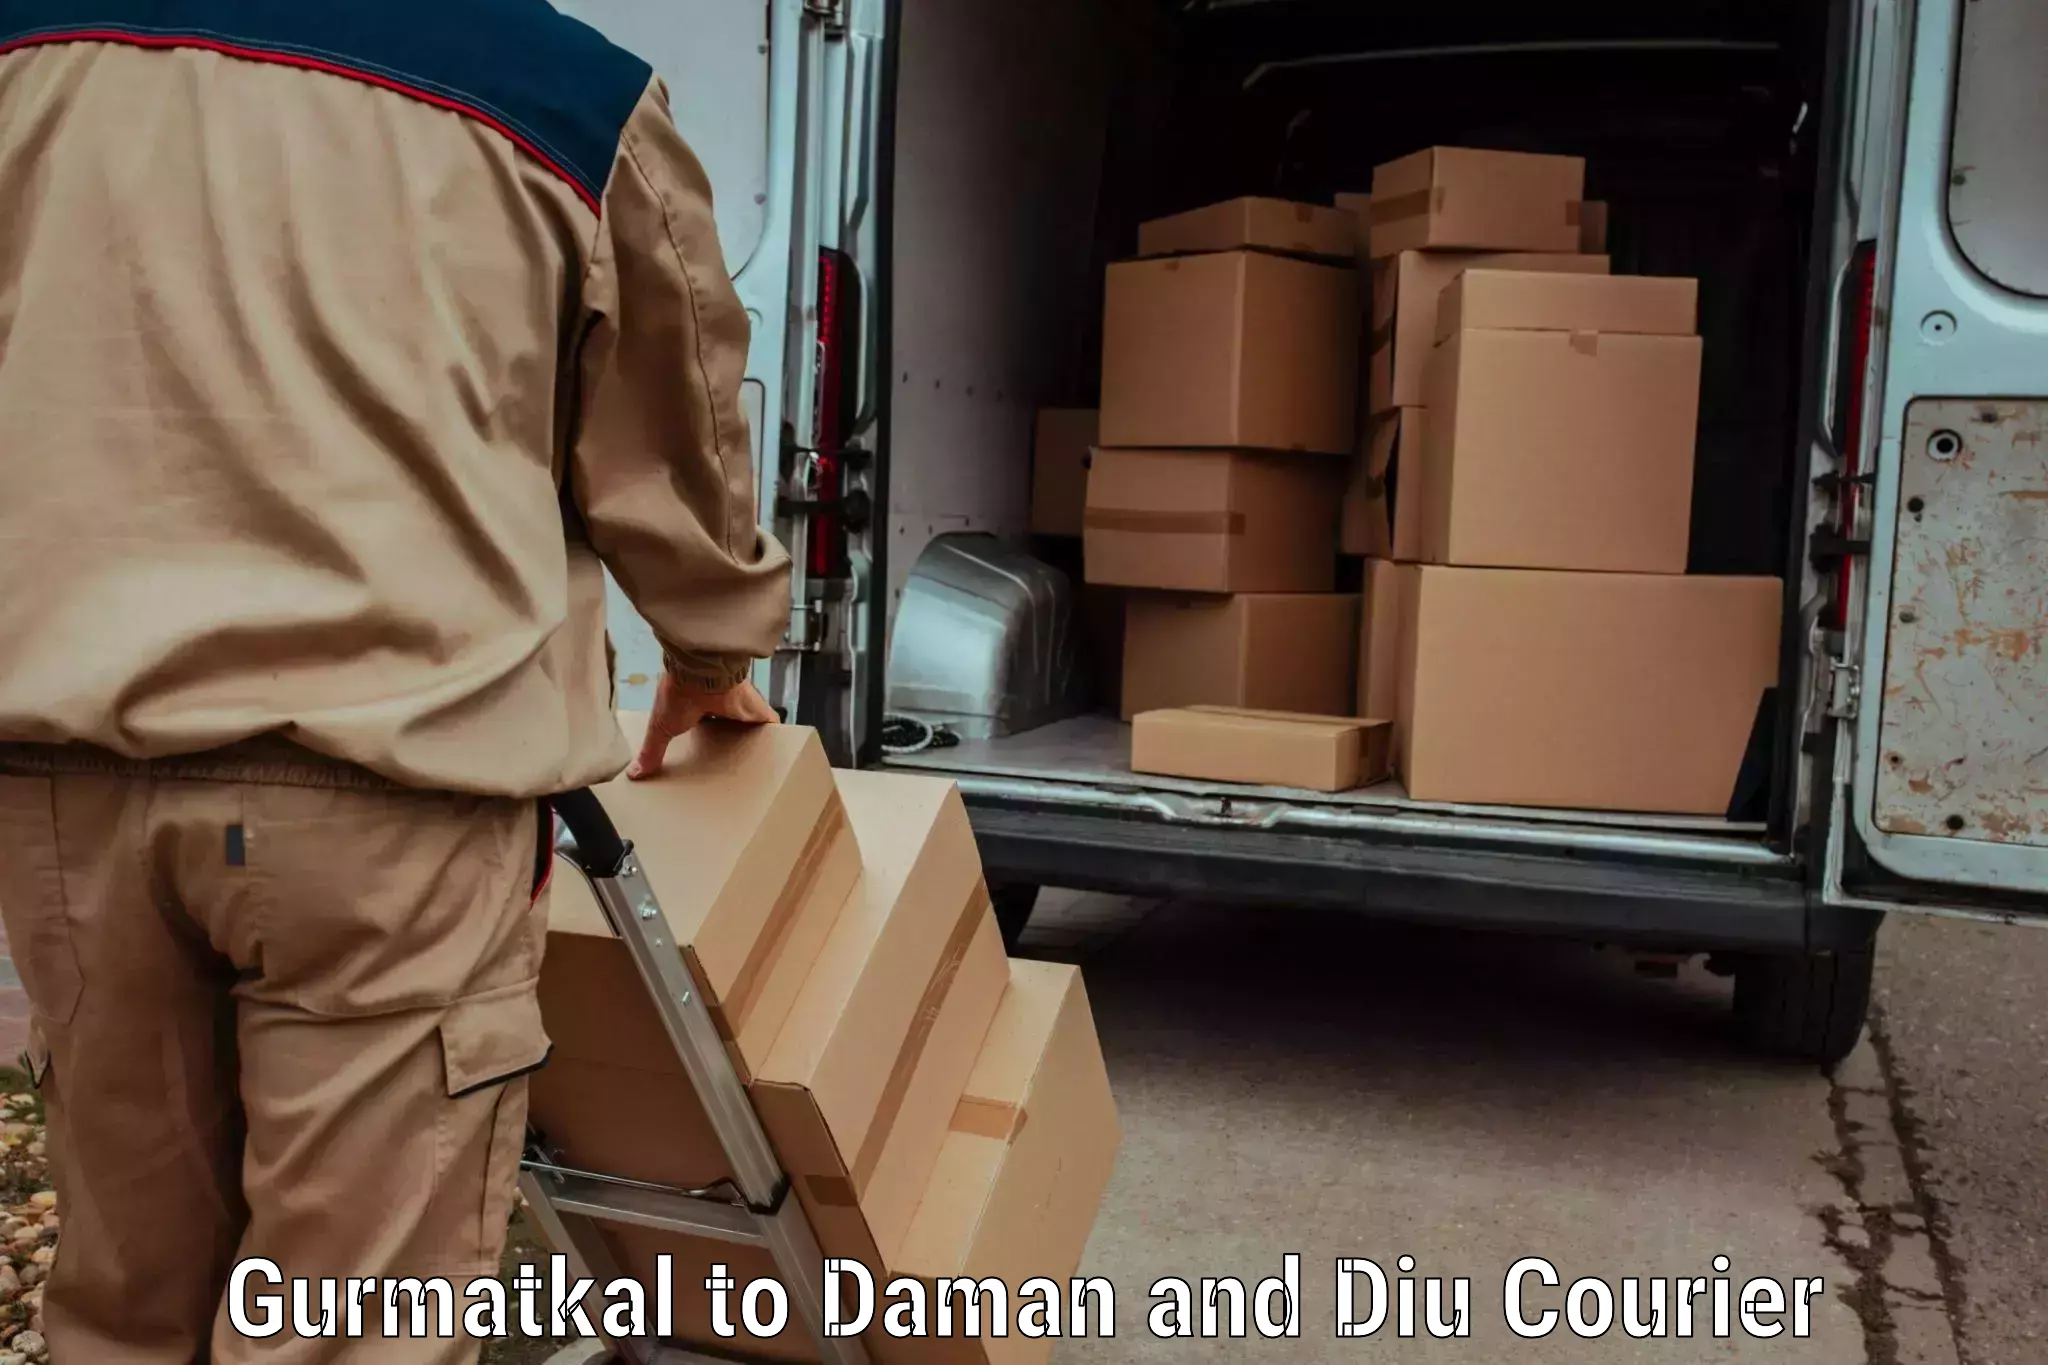 Customizable delivery plans Gurmatkal to Daman